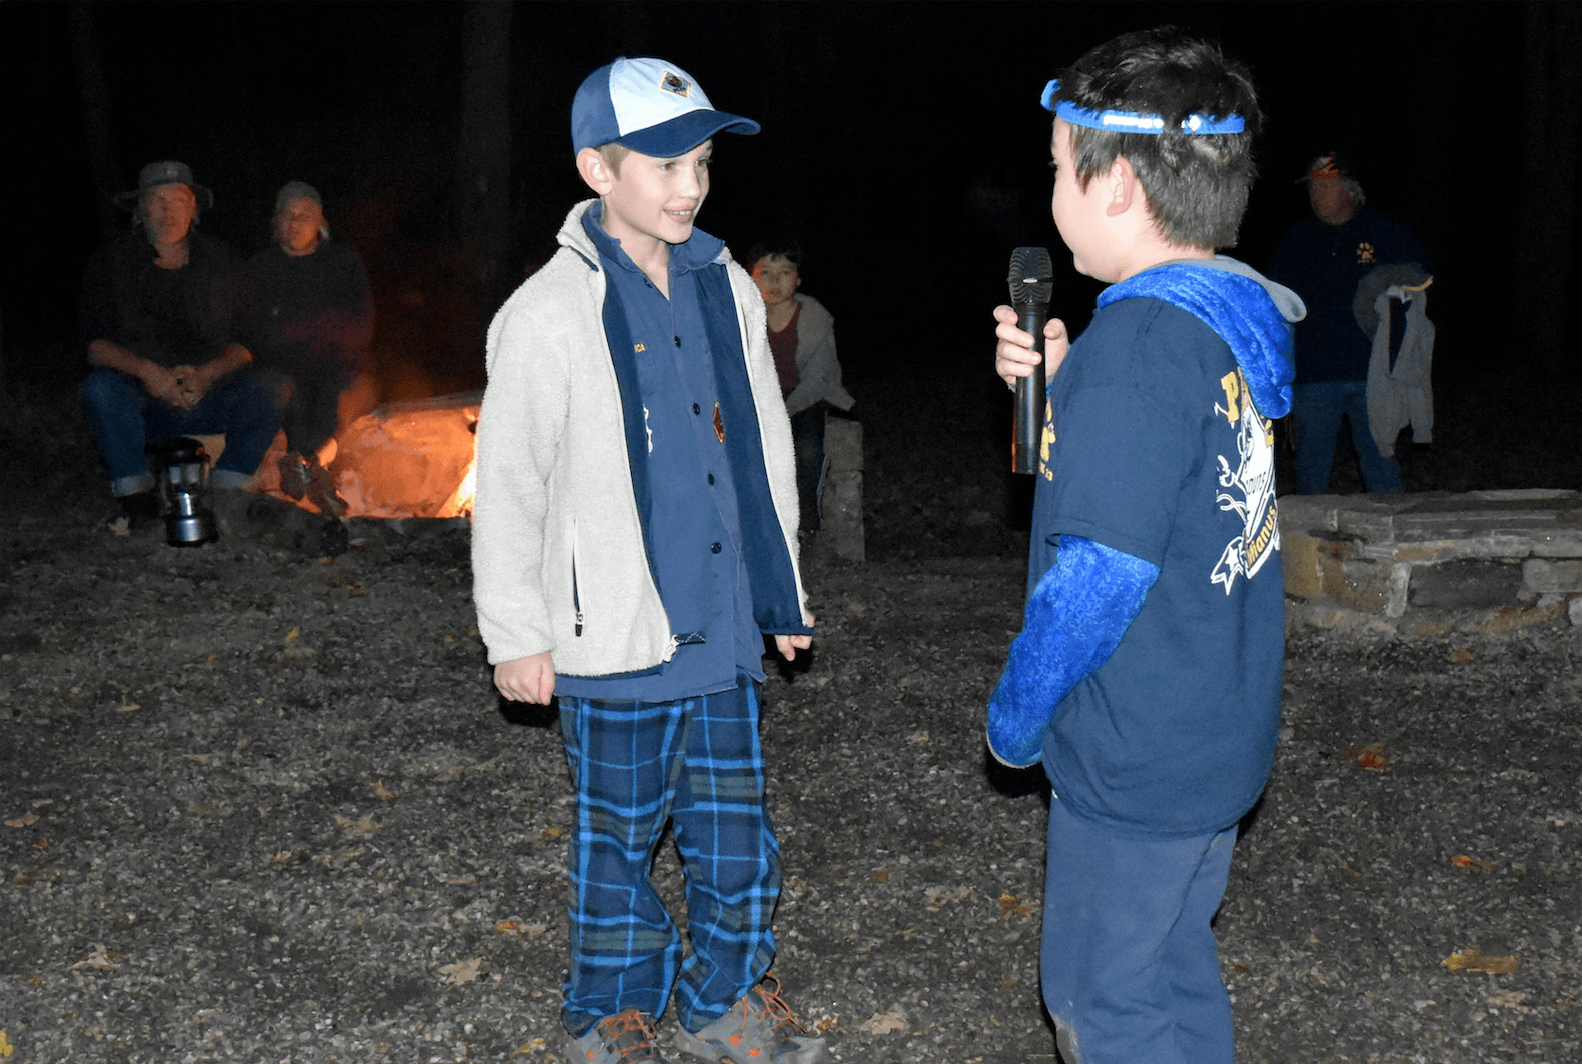 Cub Scouts perform skits at campfire at Greenwich Scouting's Fall Festival at Seton Scout Reservation.